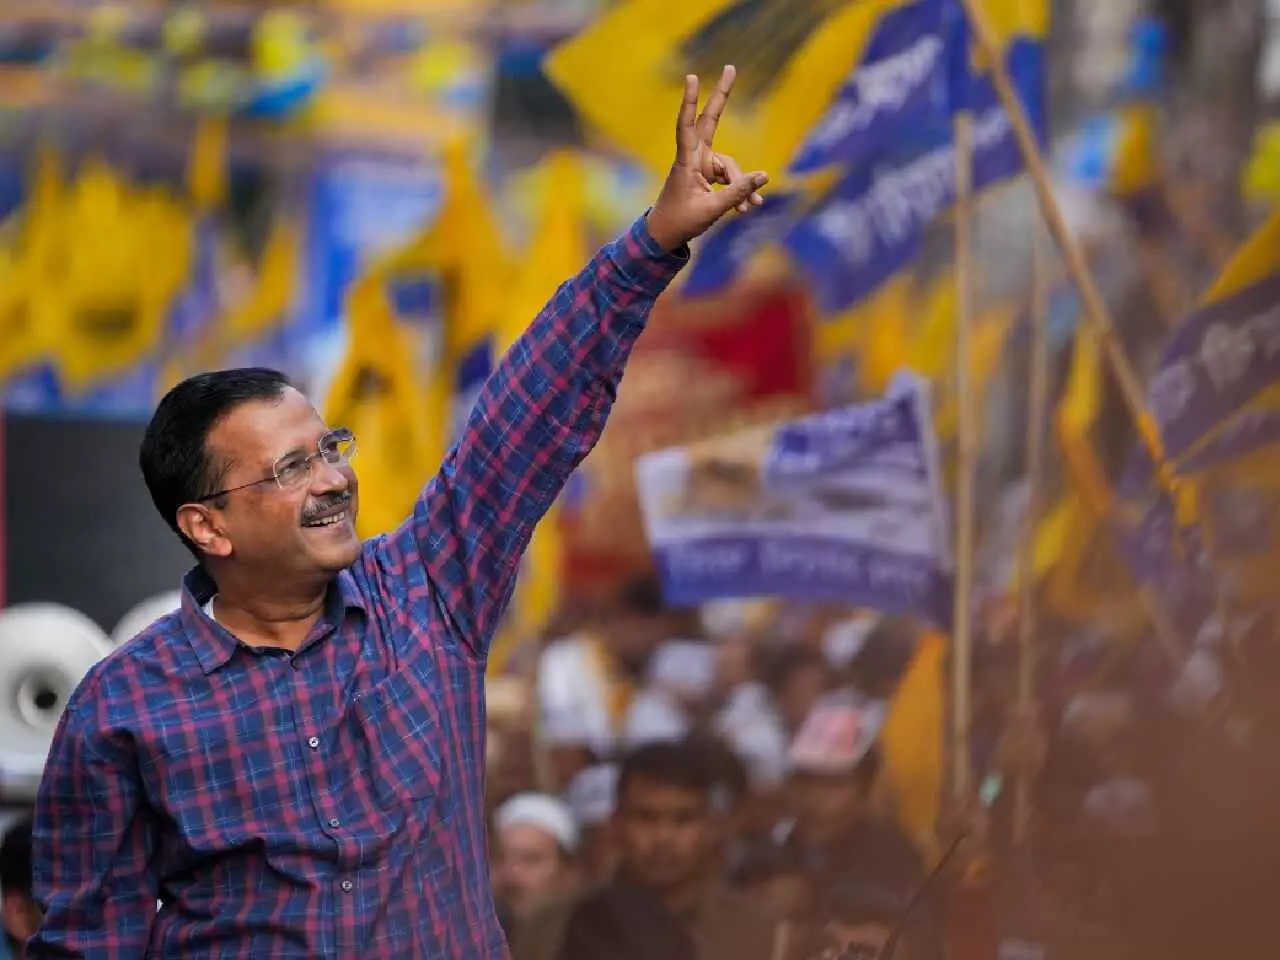 Delhi LGs office has refused to give timely appointment to CM Kejriwal for meeting claims AAP